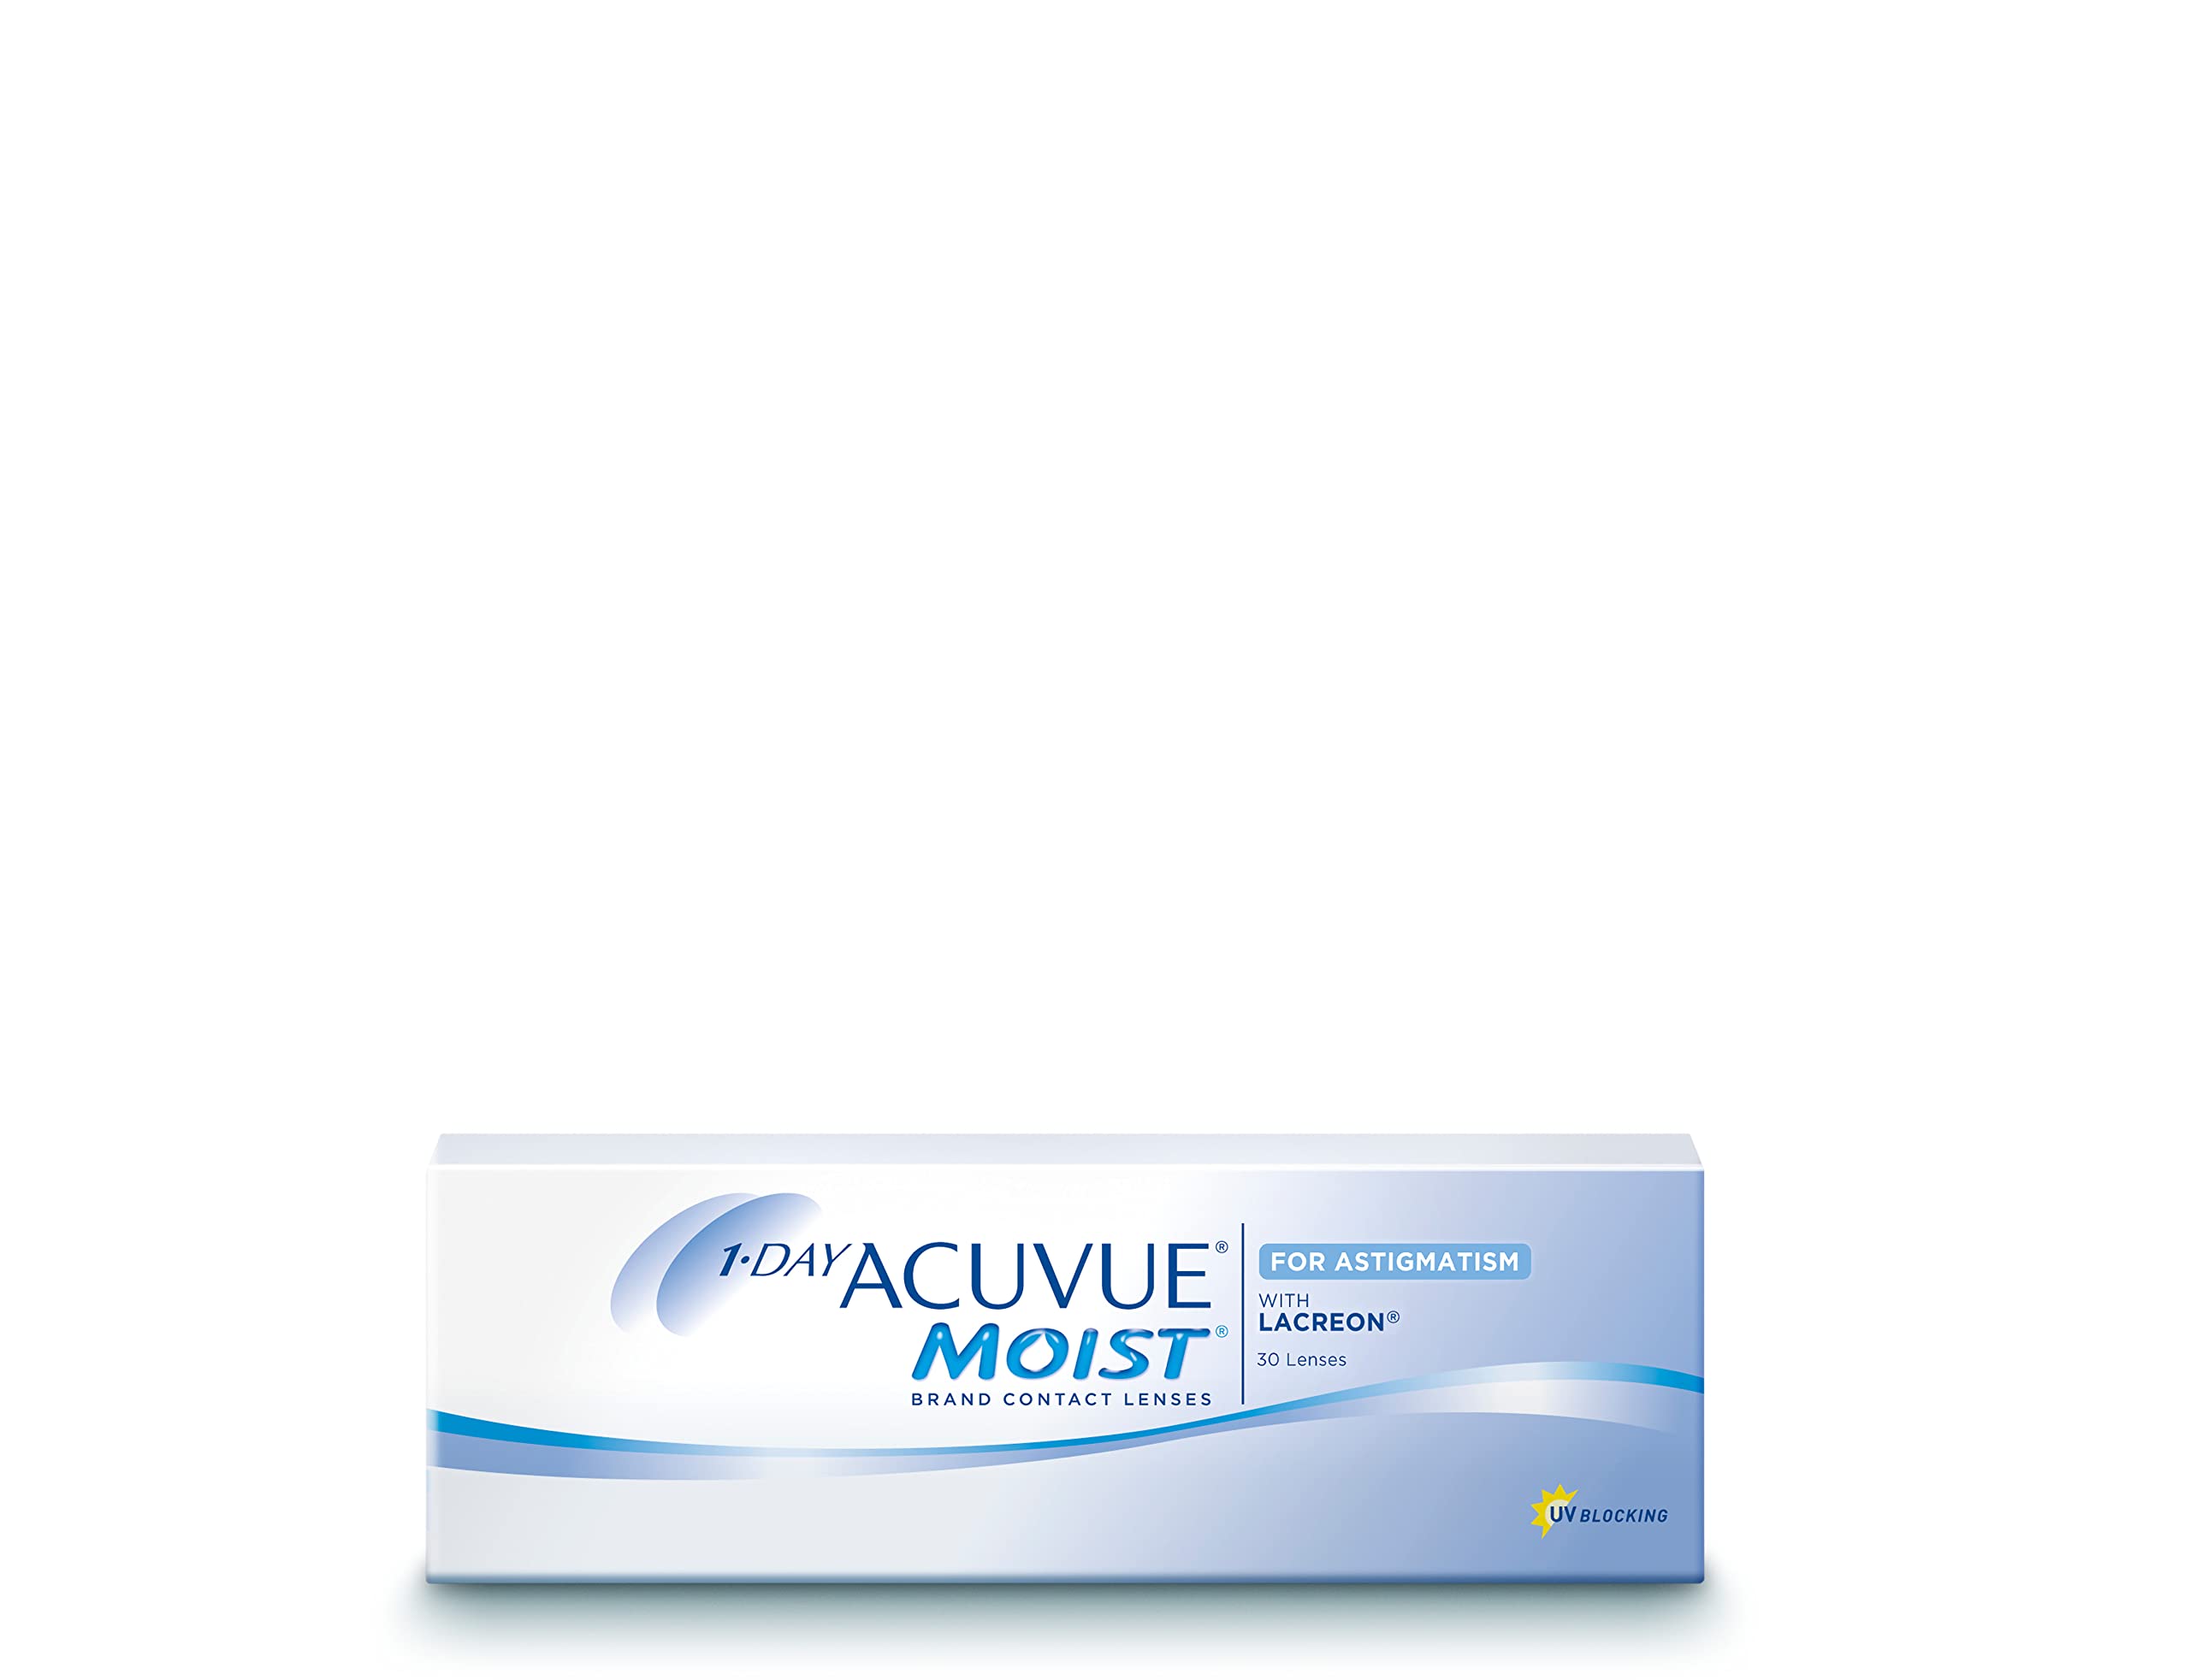 Acuvue 1-Day Acuvue Moist For Astigmatism Tageslinsen weich, 30 Stück/ BC 8.5 mm / DIA 14.5 mm/ CYL -1.25 / ACHSE 40 / -0.5 Dioptrien